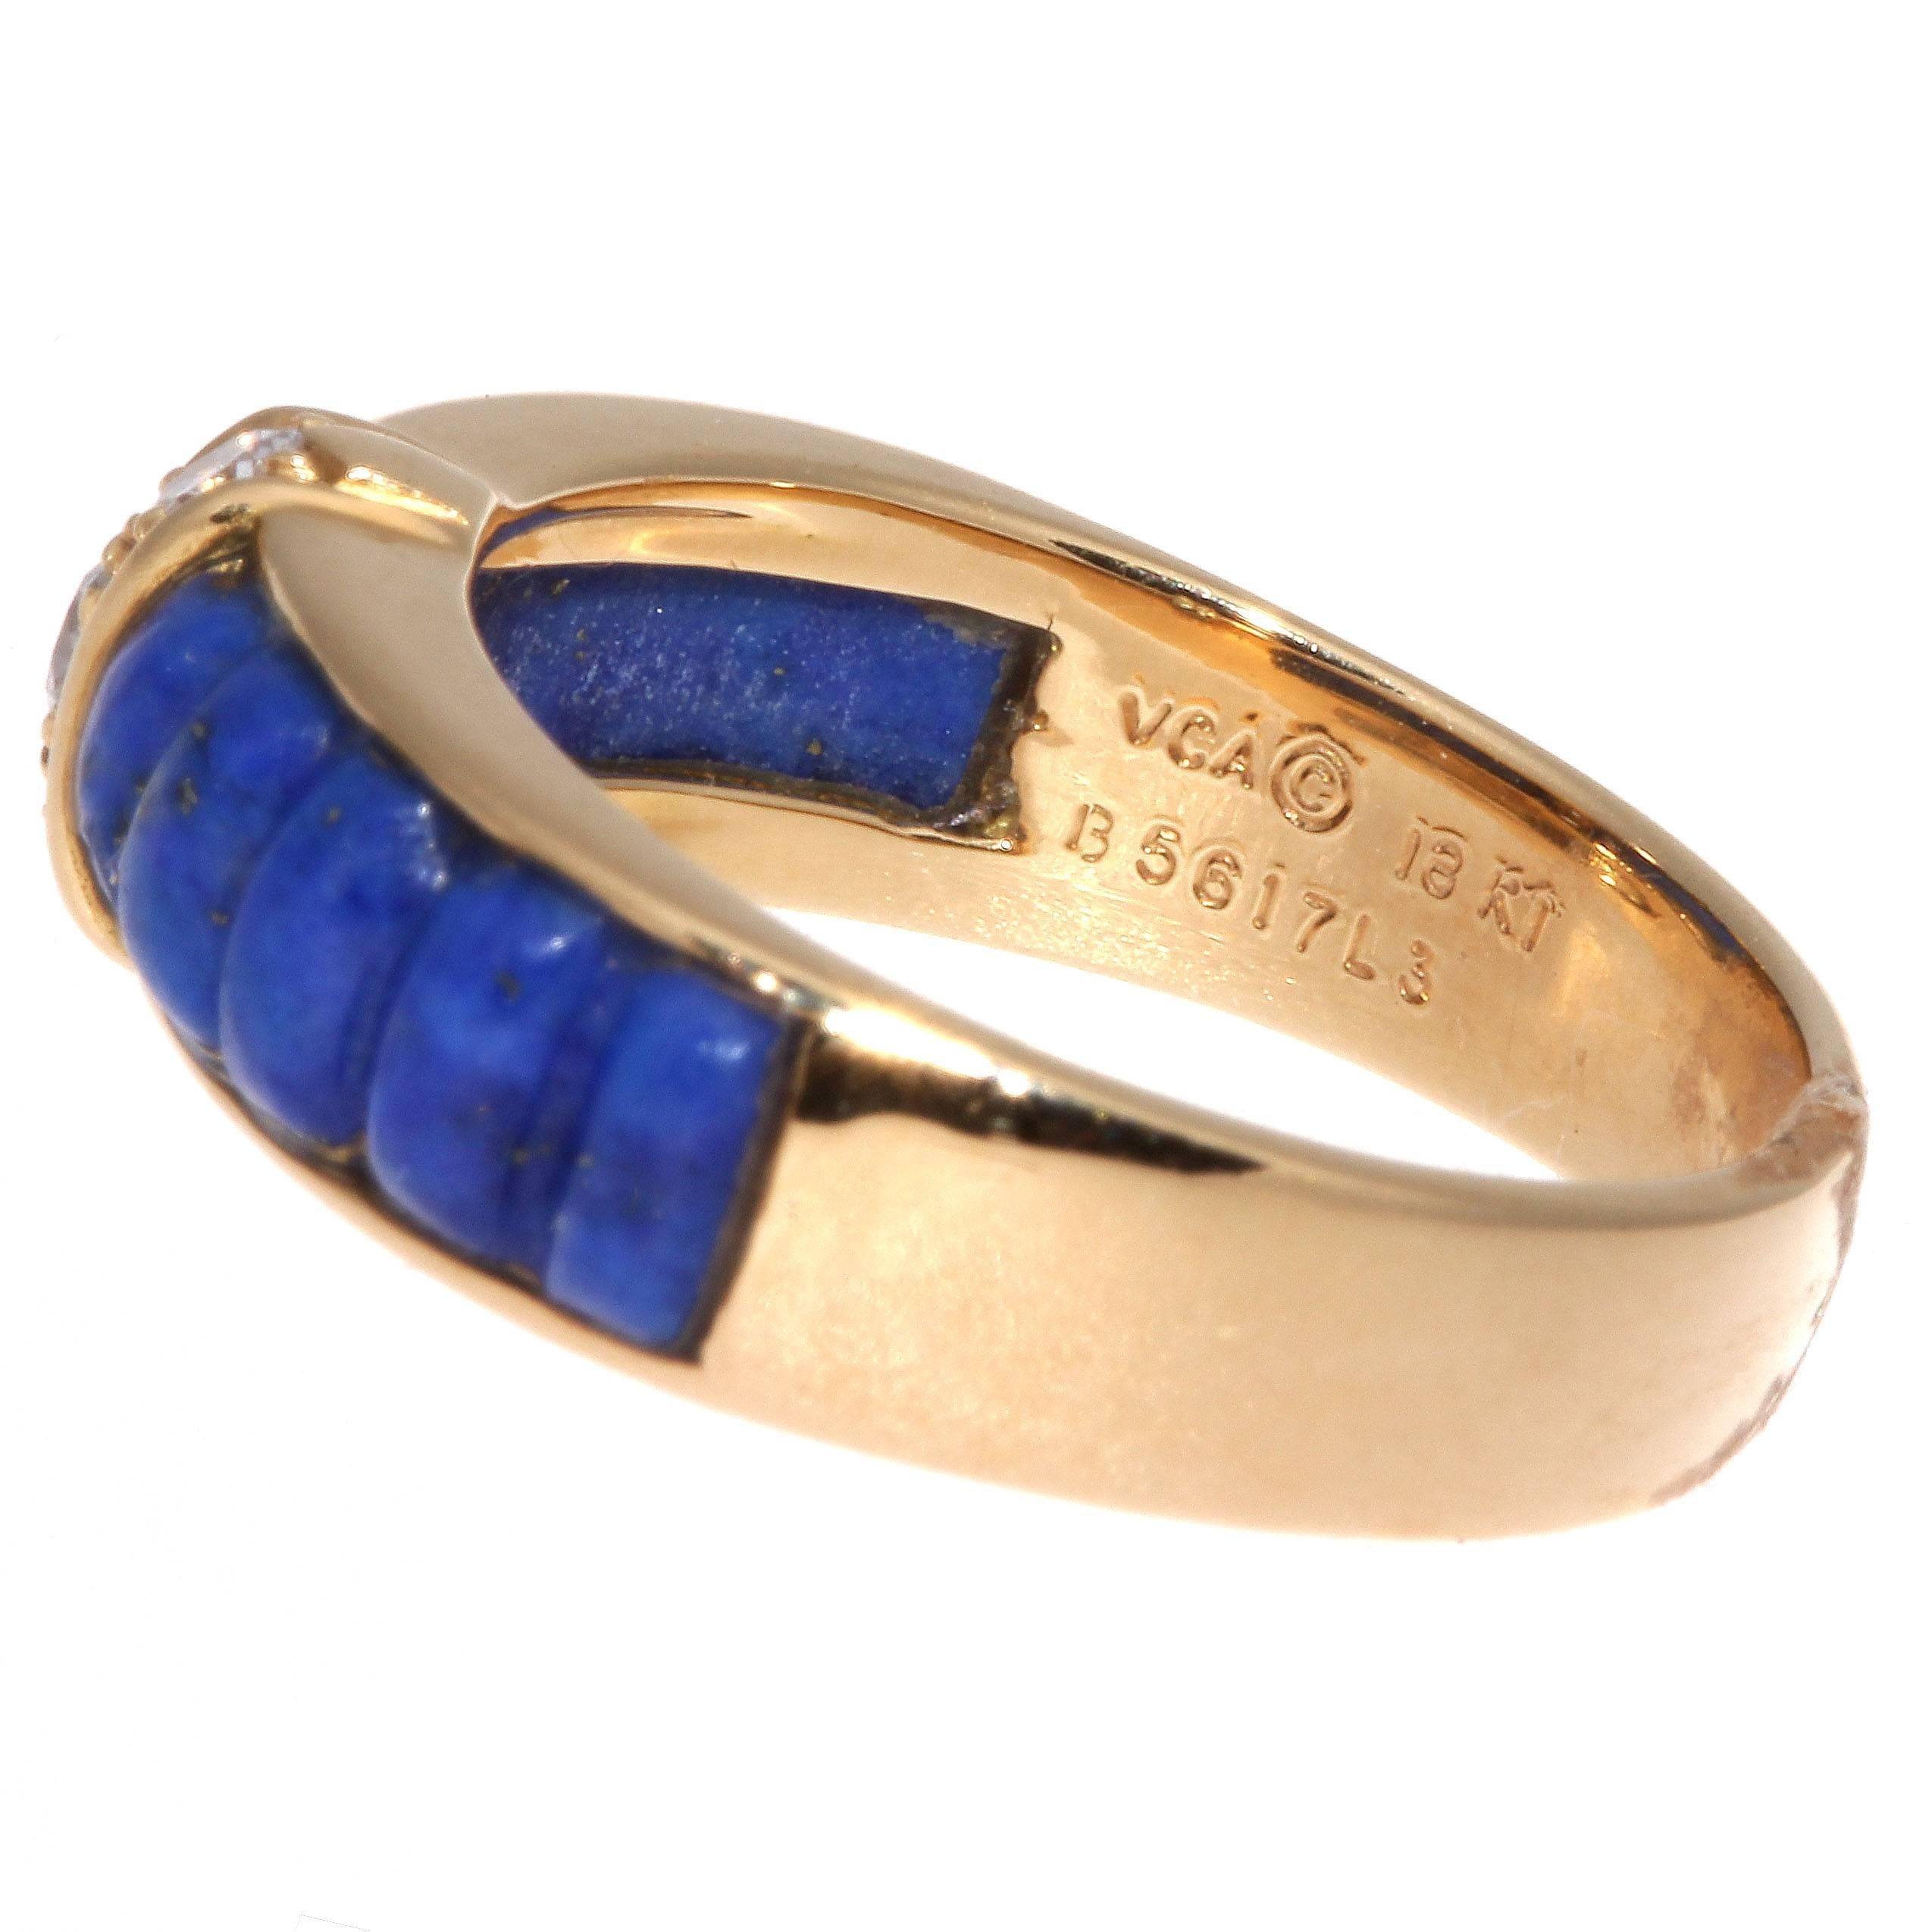 Van Cleef & 
Arpels, a long rich history of trend setting fashion that is still relevant today. This ring has been fashioned with glowing multi hued blue lapis lazuli that is complemented nicely by 3 near colorless diamonds. Crafted in 18k yellow